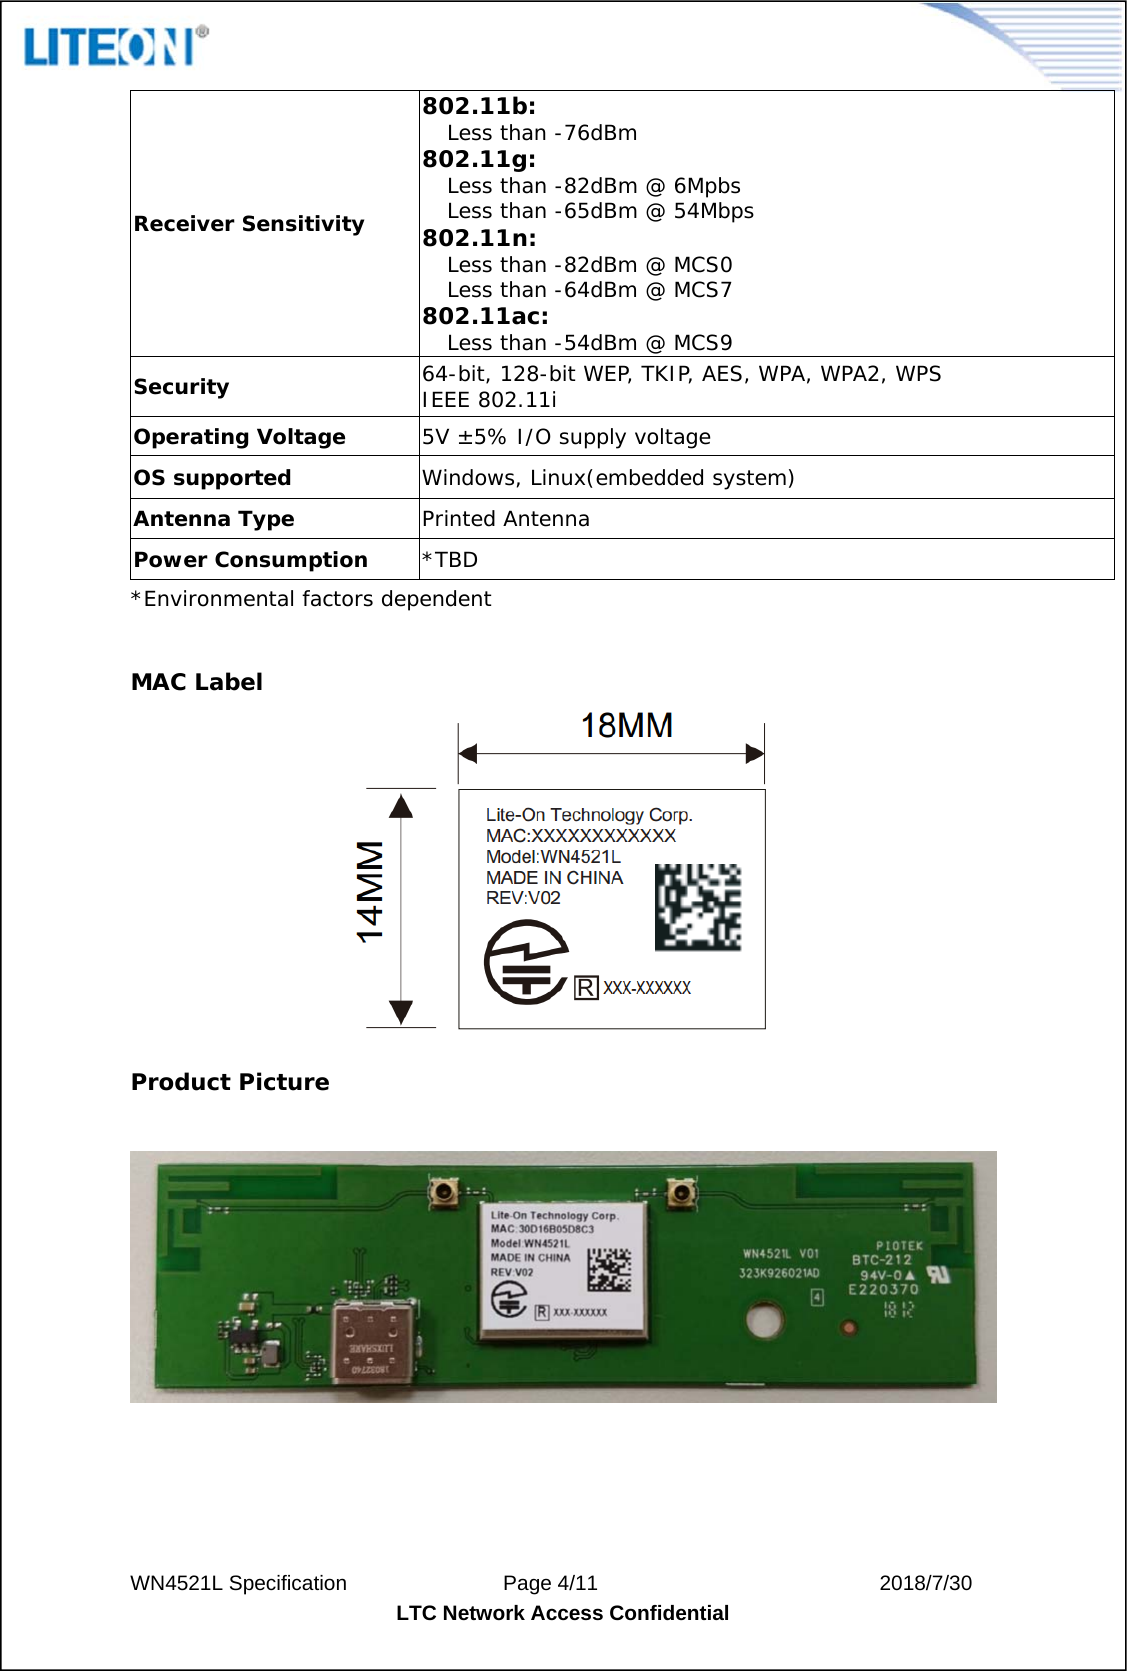  WN4521L Specification               Page 4/11                           2018/7/30 LTC Network Access Confidential  Receiver Sensitivity 802.11b: Less than -76dBm  802.11g: Less than -82dBm @ 6Mpbs Less than -65dBm @ 54Mbps  802.11n: Less than -82dBm @ MCS0 Less than -64dBm @ MCS7 802.11ac: Less than -54dBm @ MCS9 Security  64-bit, 128-bit WEP, TKIP, AES, WPA, WPA2, WPS  IEEE 802.11i Operating Voltage  5V ±5% I/O supply voltage OS supported  Windows, Linux(embedded system) Antenna Type  Printed Antenna Power Consumption  *TBD *Environmental factors dependent  MAC Label  Product Picture     